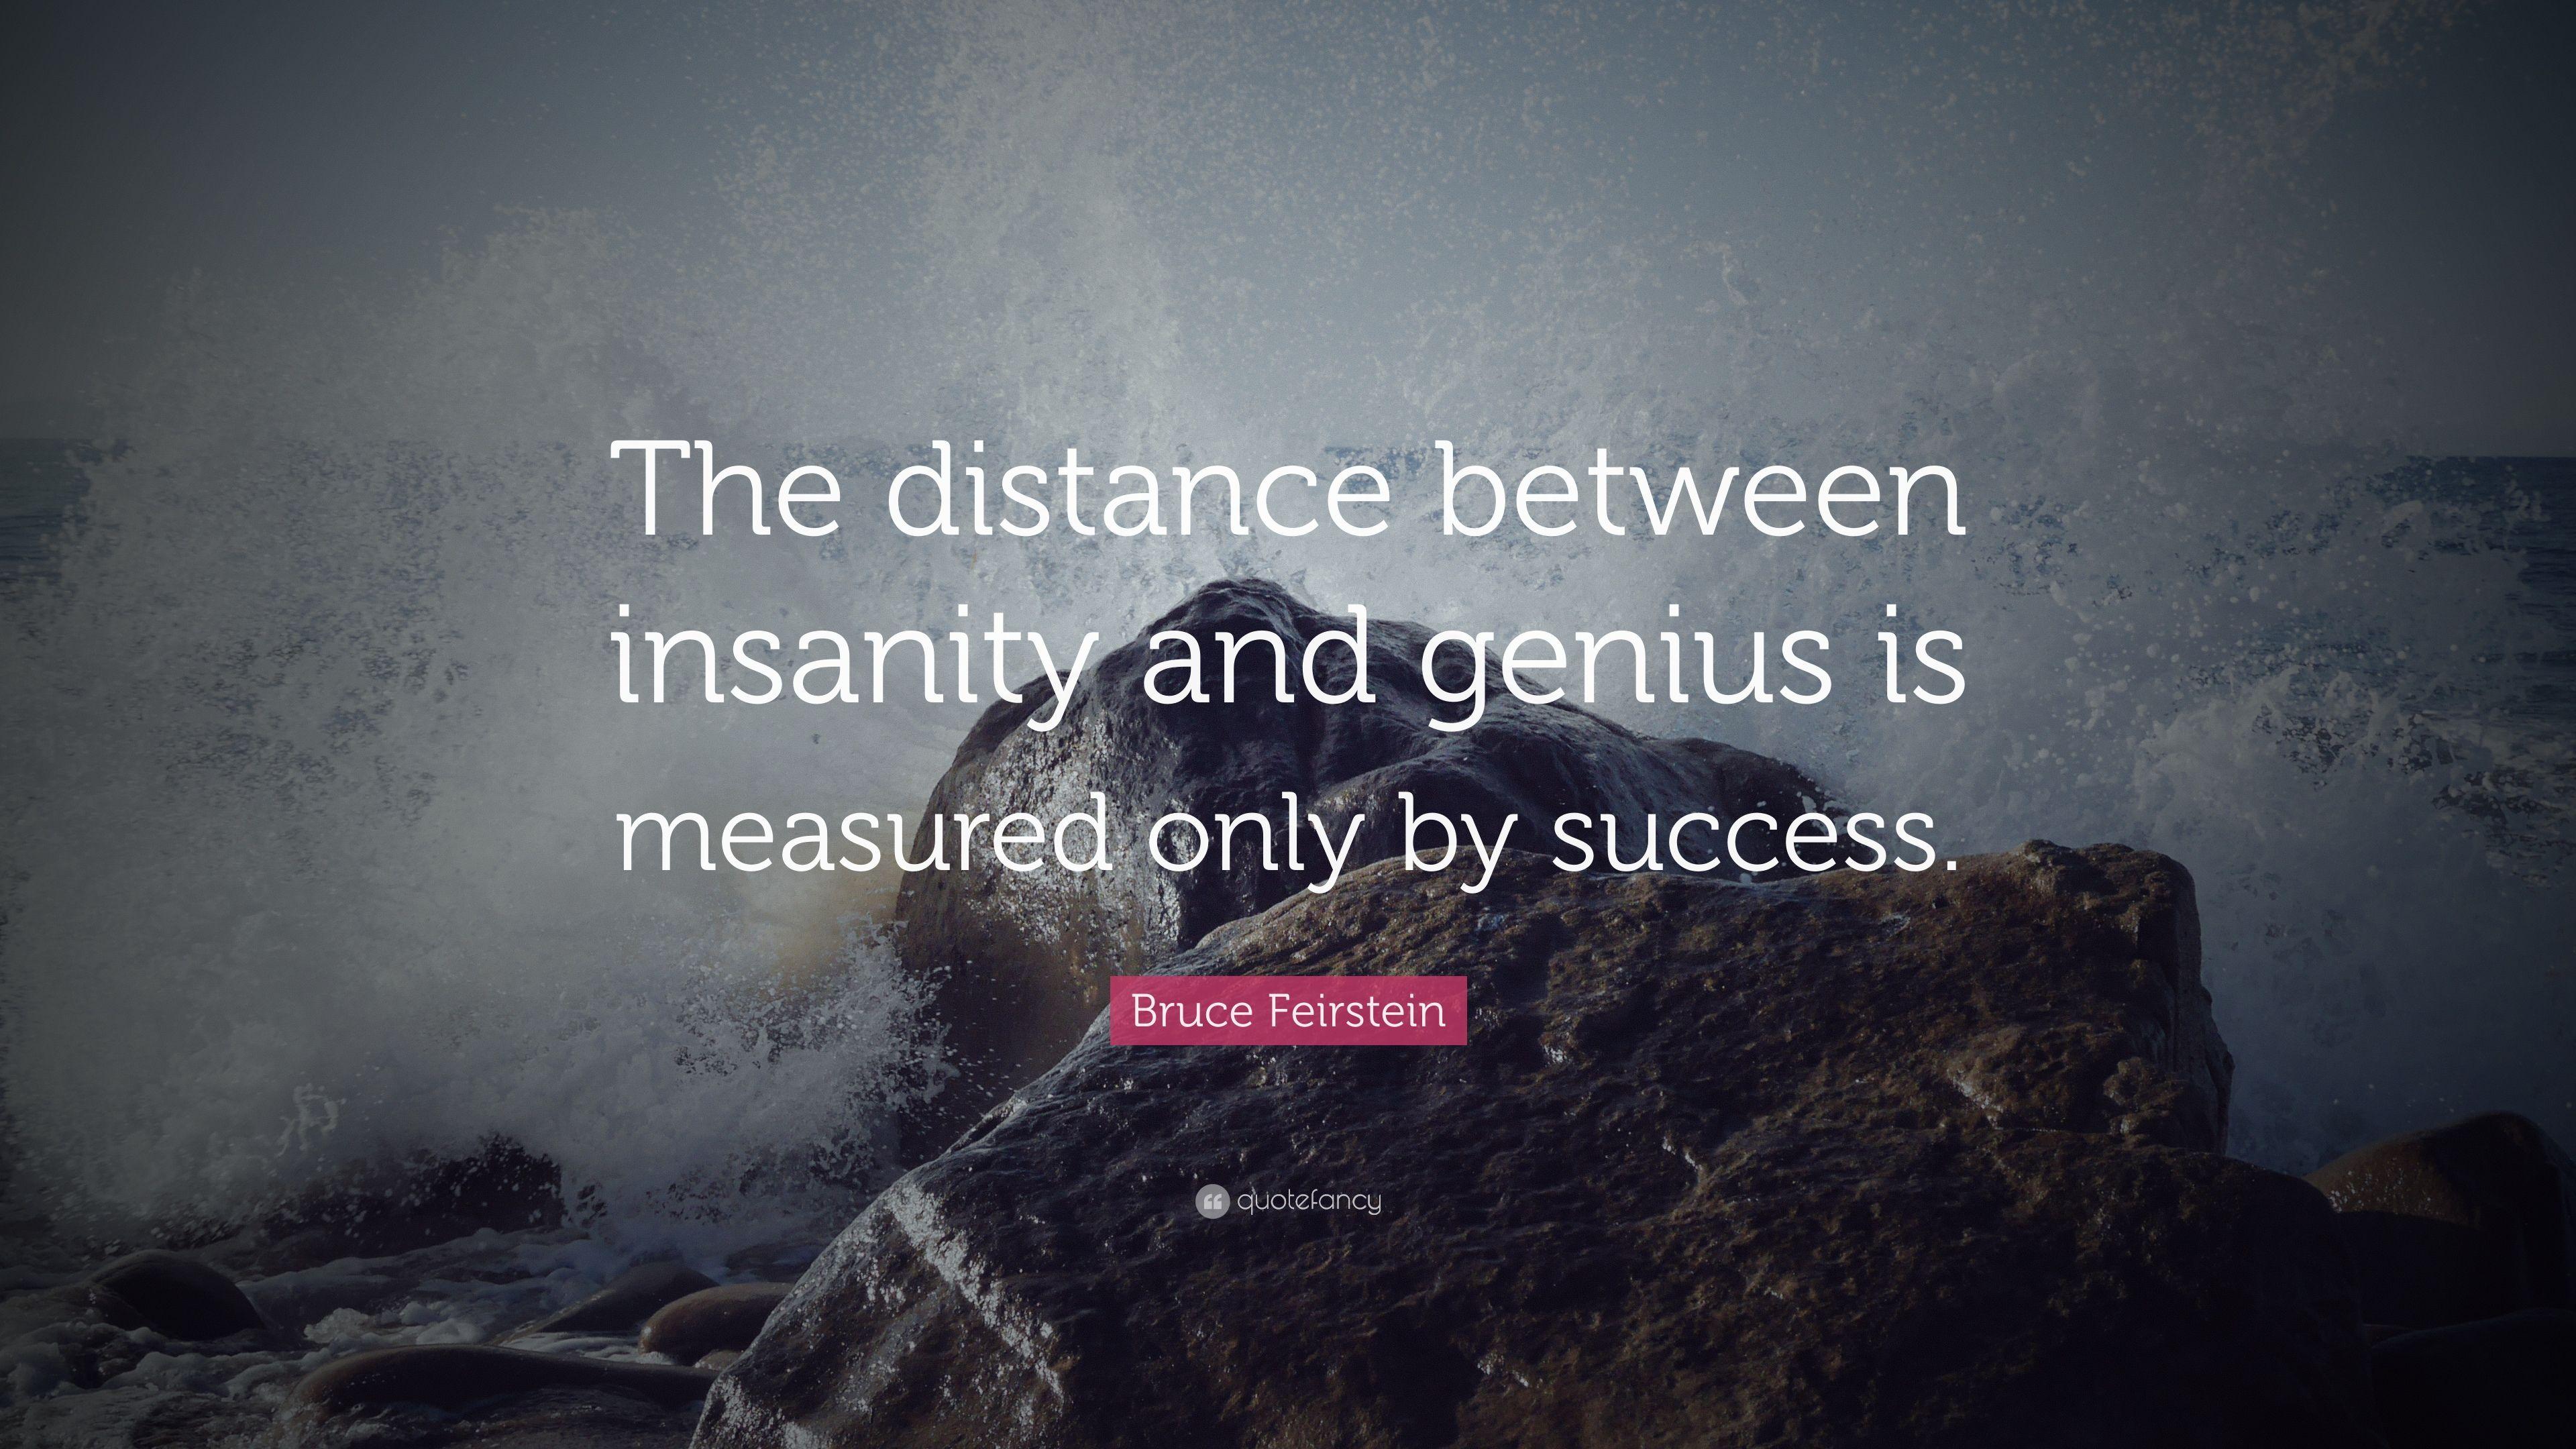 Bruce Feirstein Quote: “The distance between insanity and genius